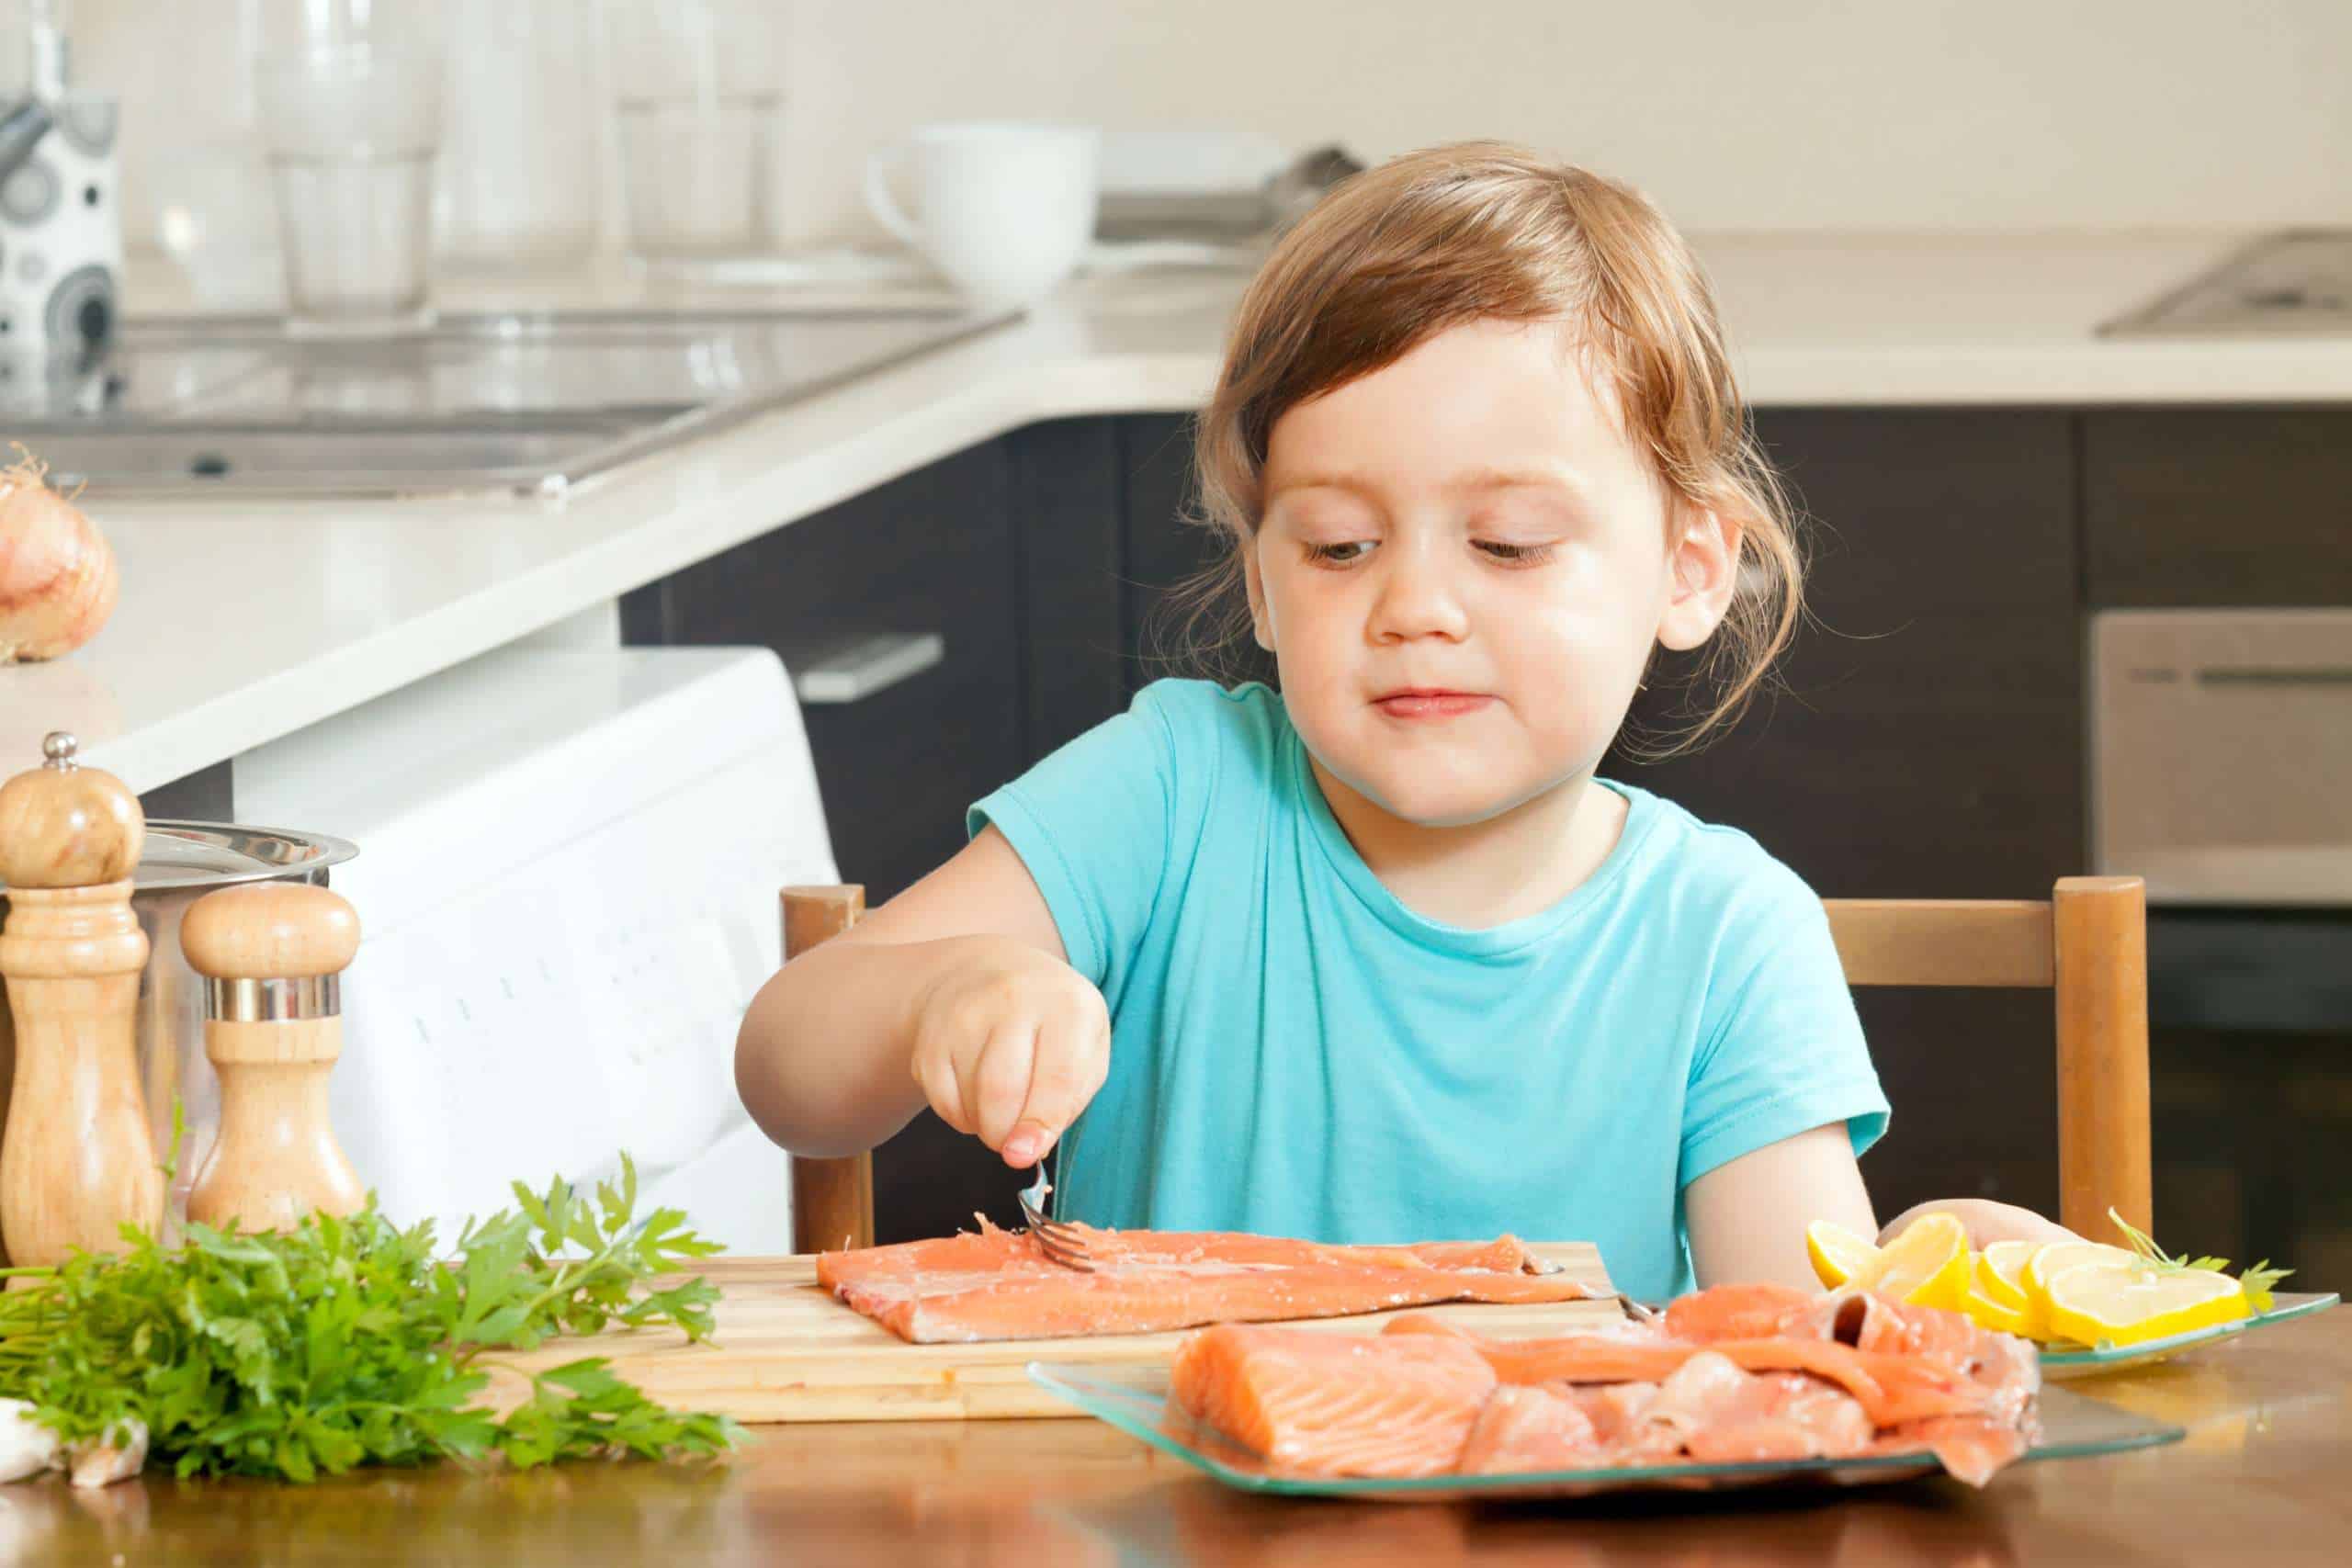 Why should active children eat fish?